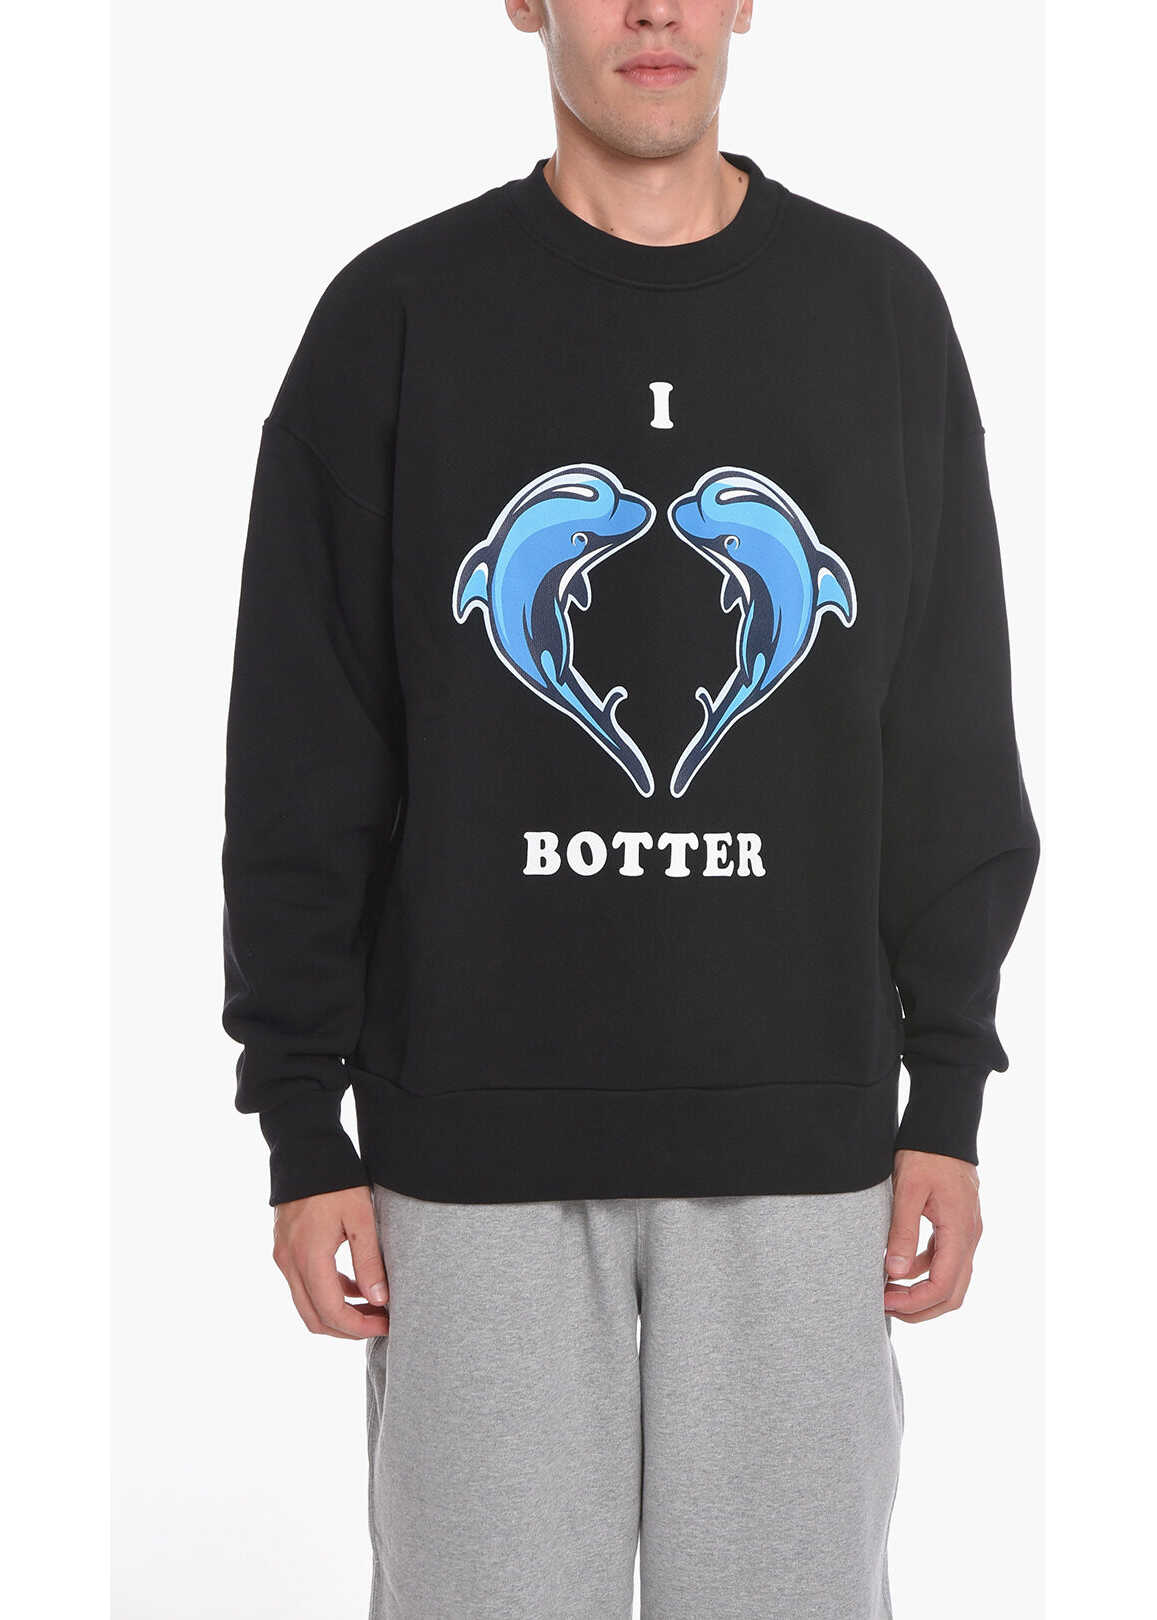 BOTTER Brushed Cotton Crew-Neck Sweatshirt With Printed Dolphins Black